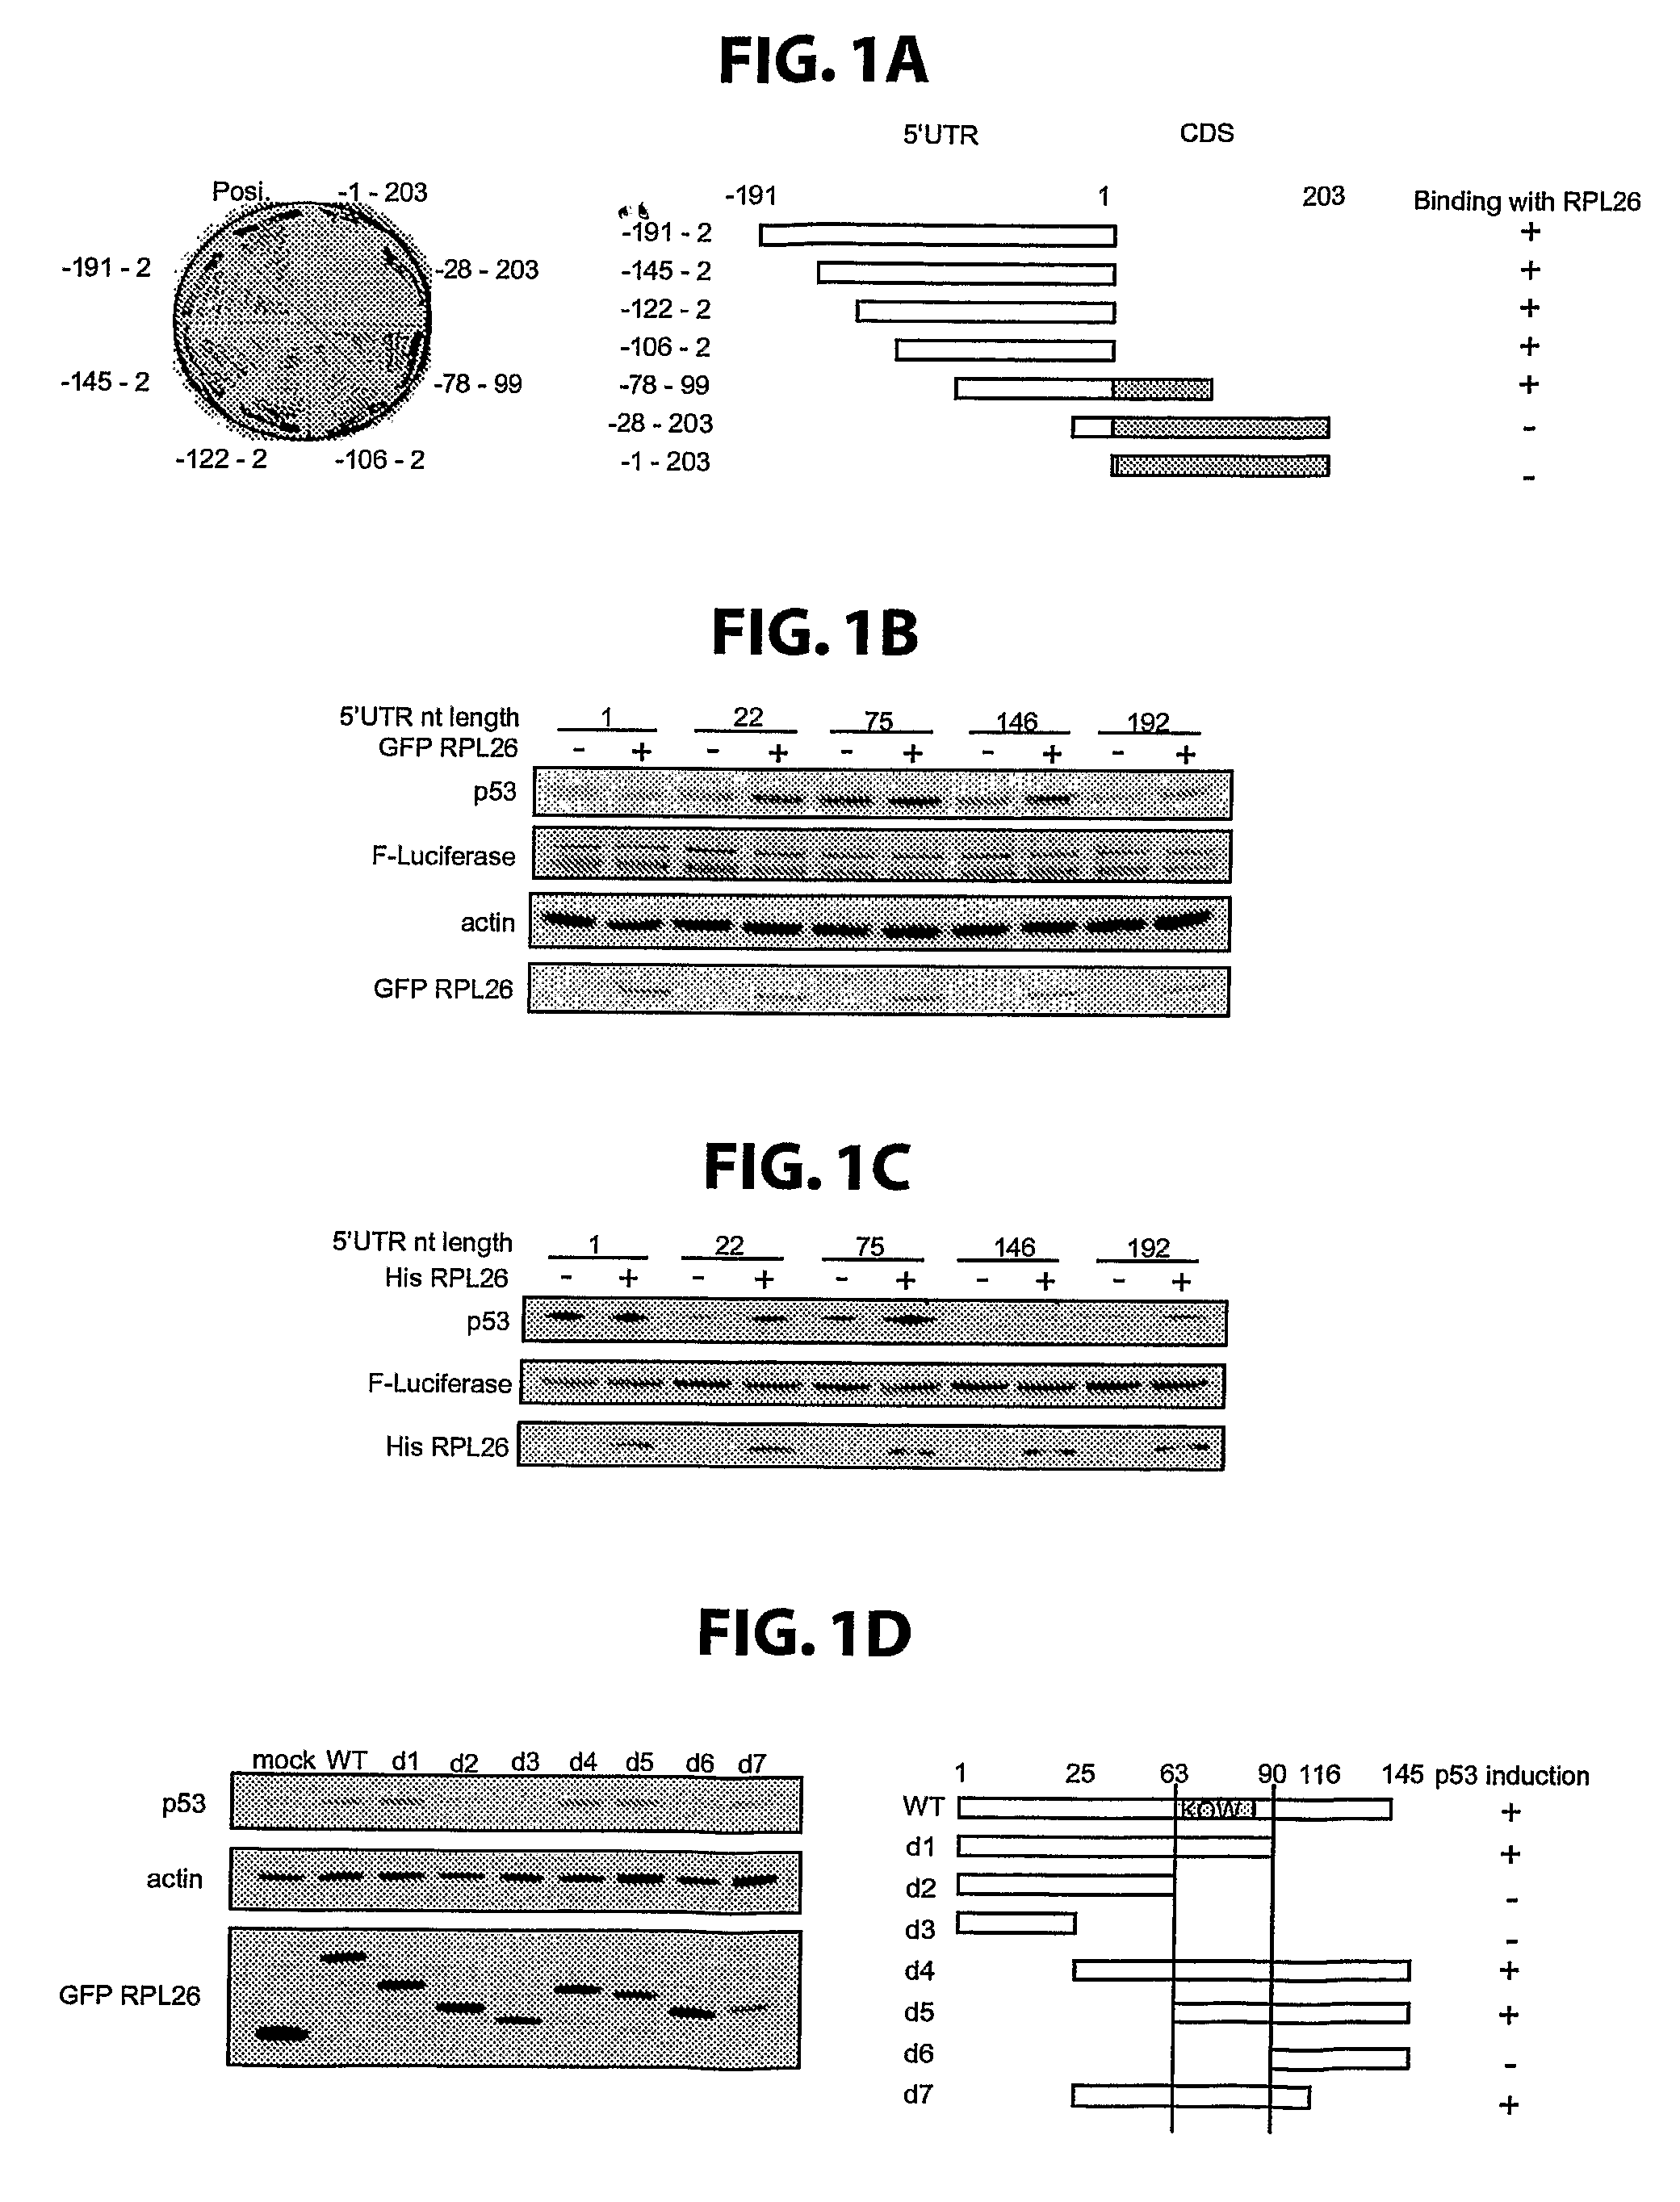 METHODS FOR REGULATION OF p53 TRANSLATION AND FUNCTION